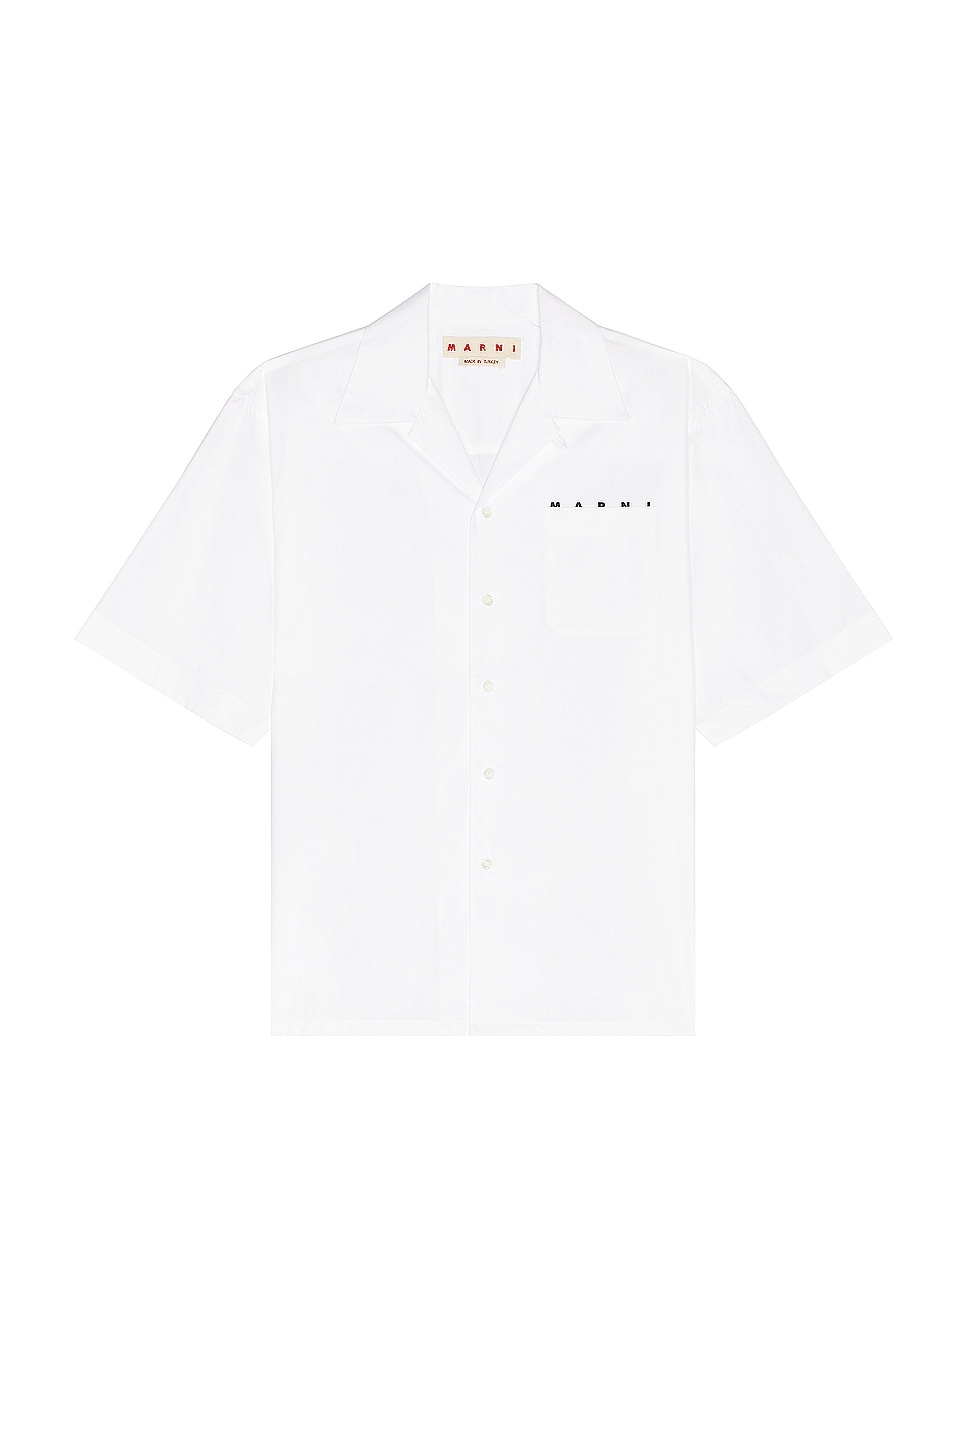 Image 1 of Marni S/S Shirt in Lily White.